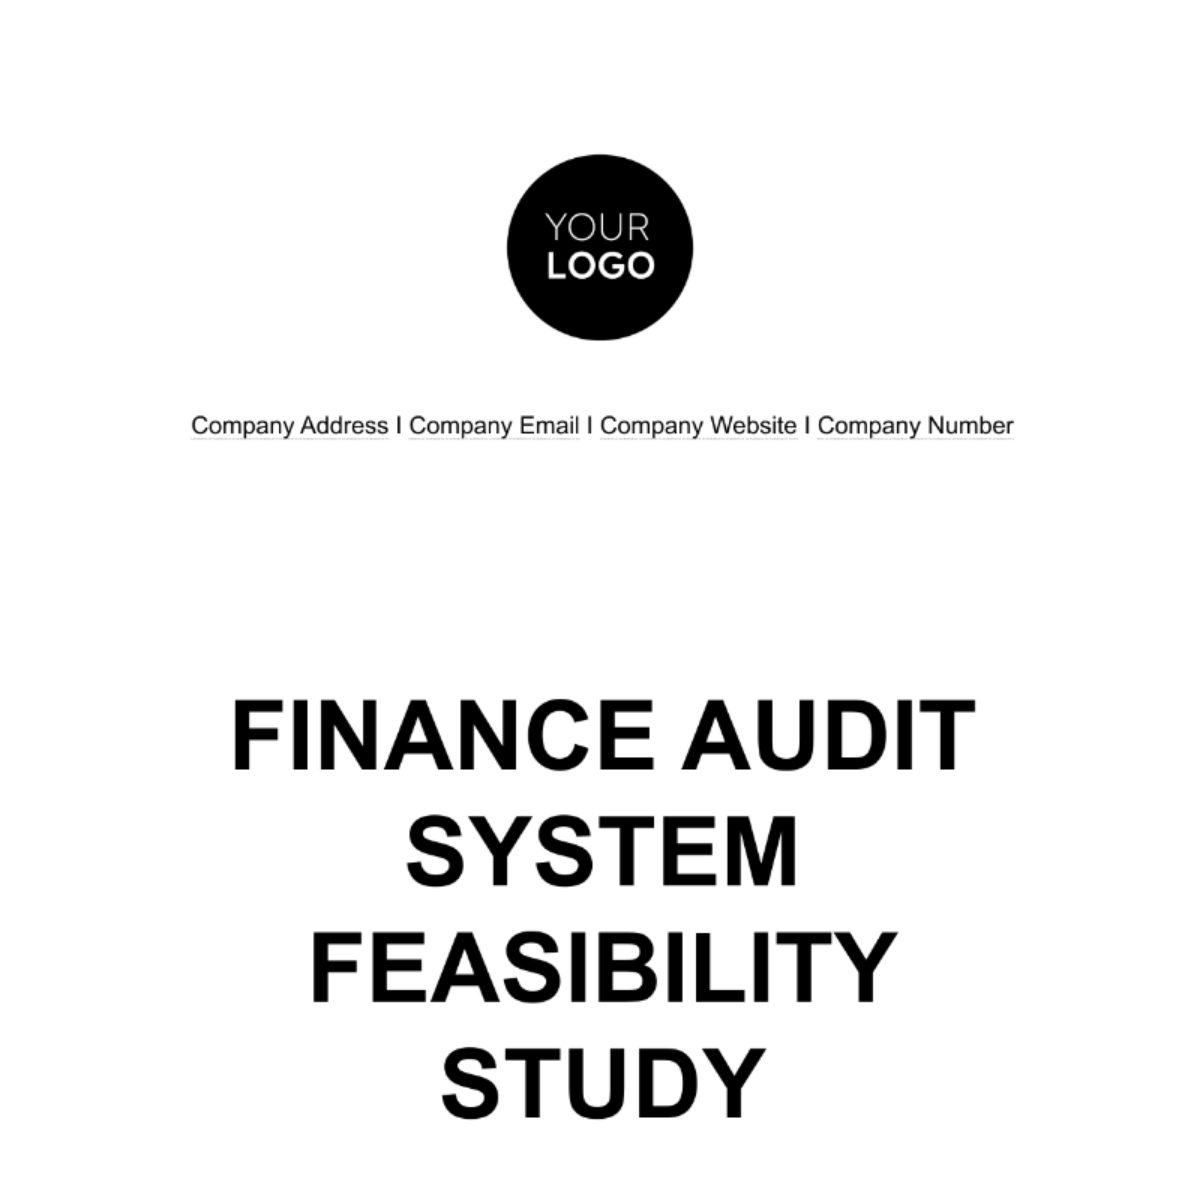 Finance Audit System Feasibility Study Template